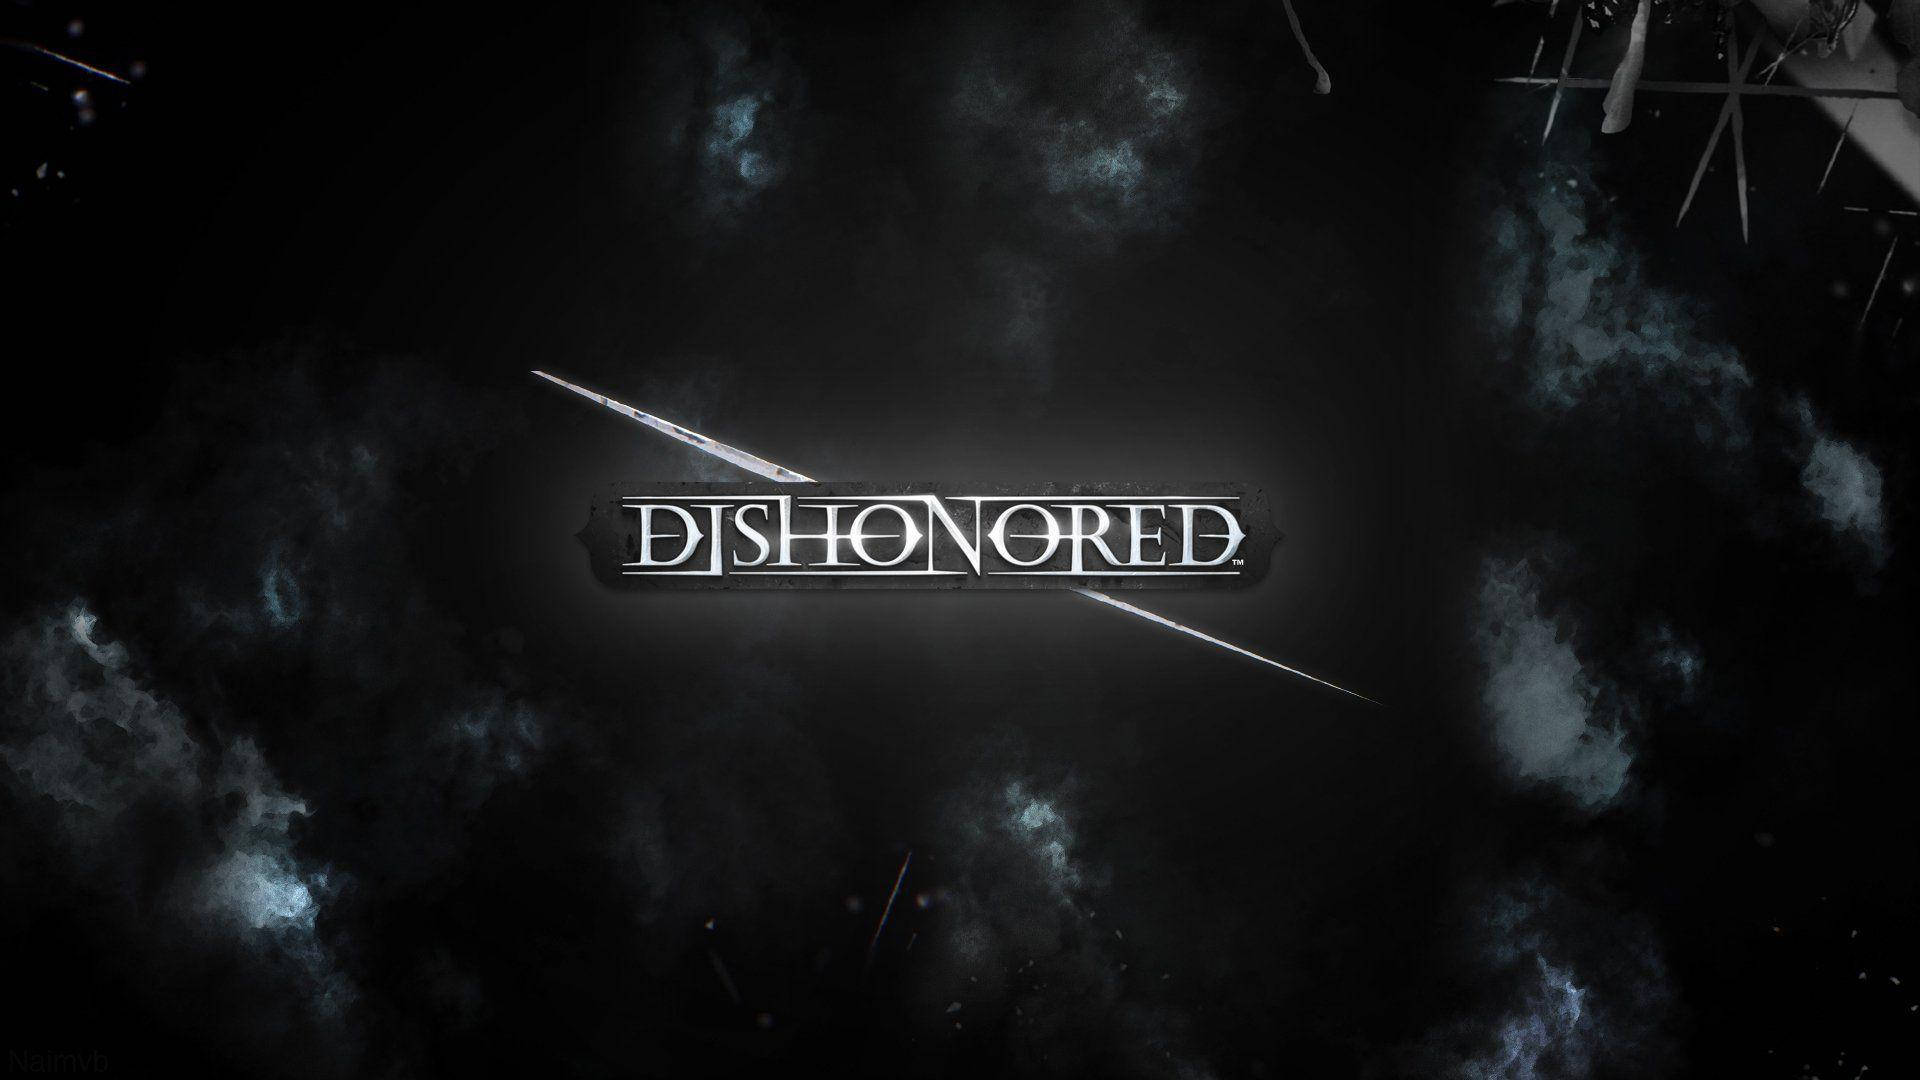 Dishonored Title Poster Background